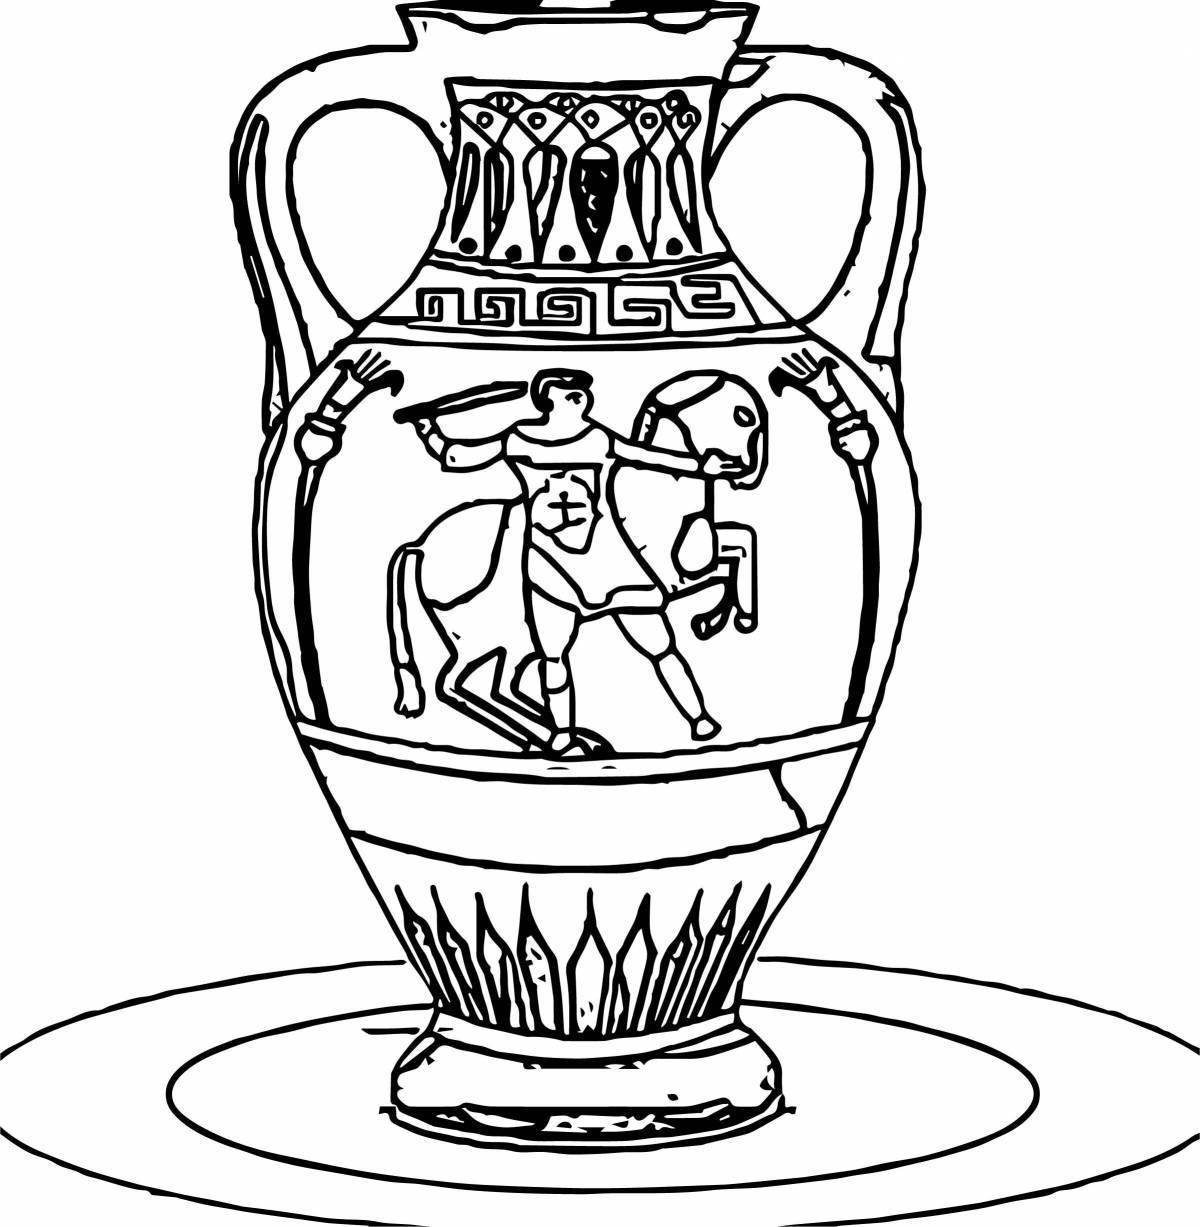 Intriguing ancient greece coloring book for kids